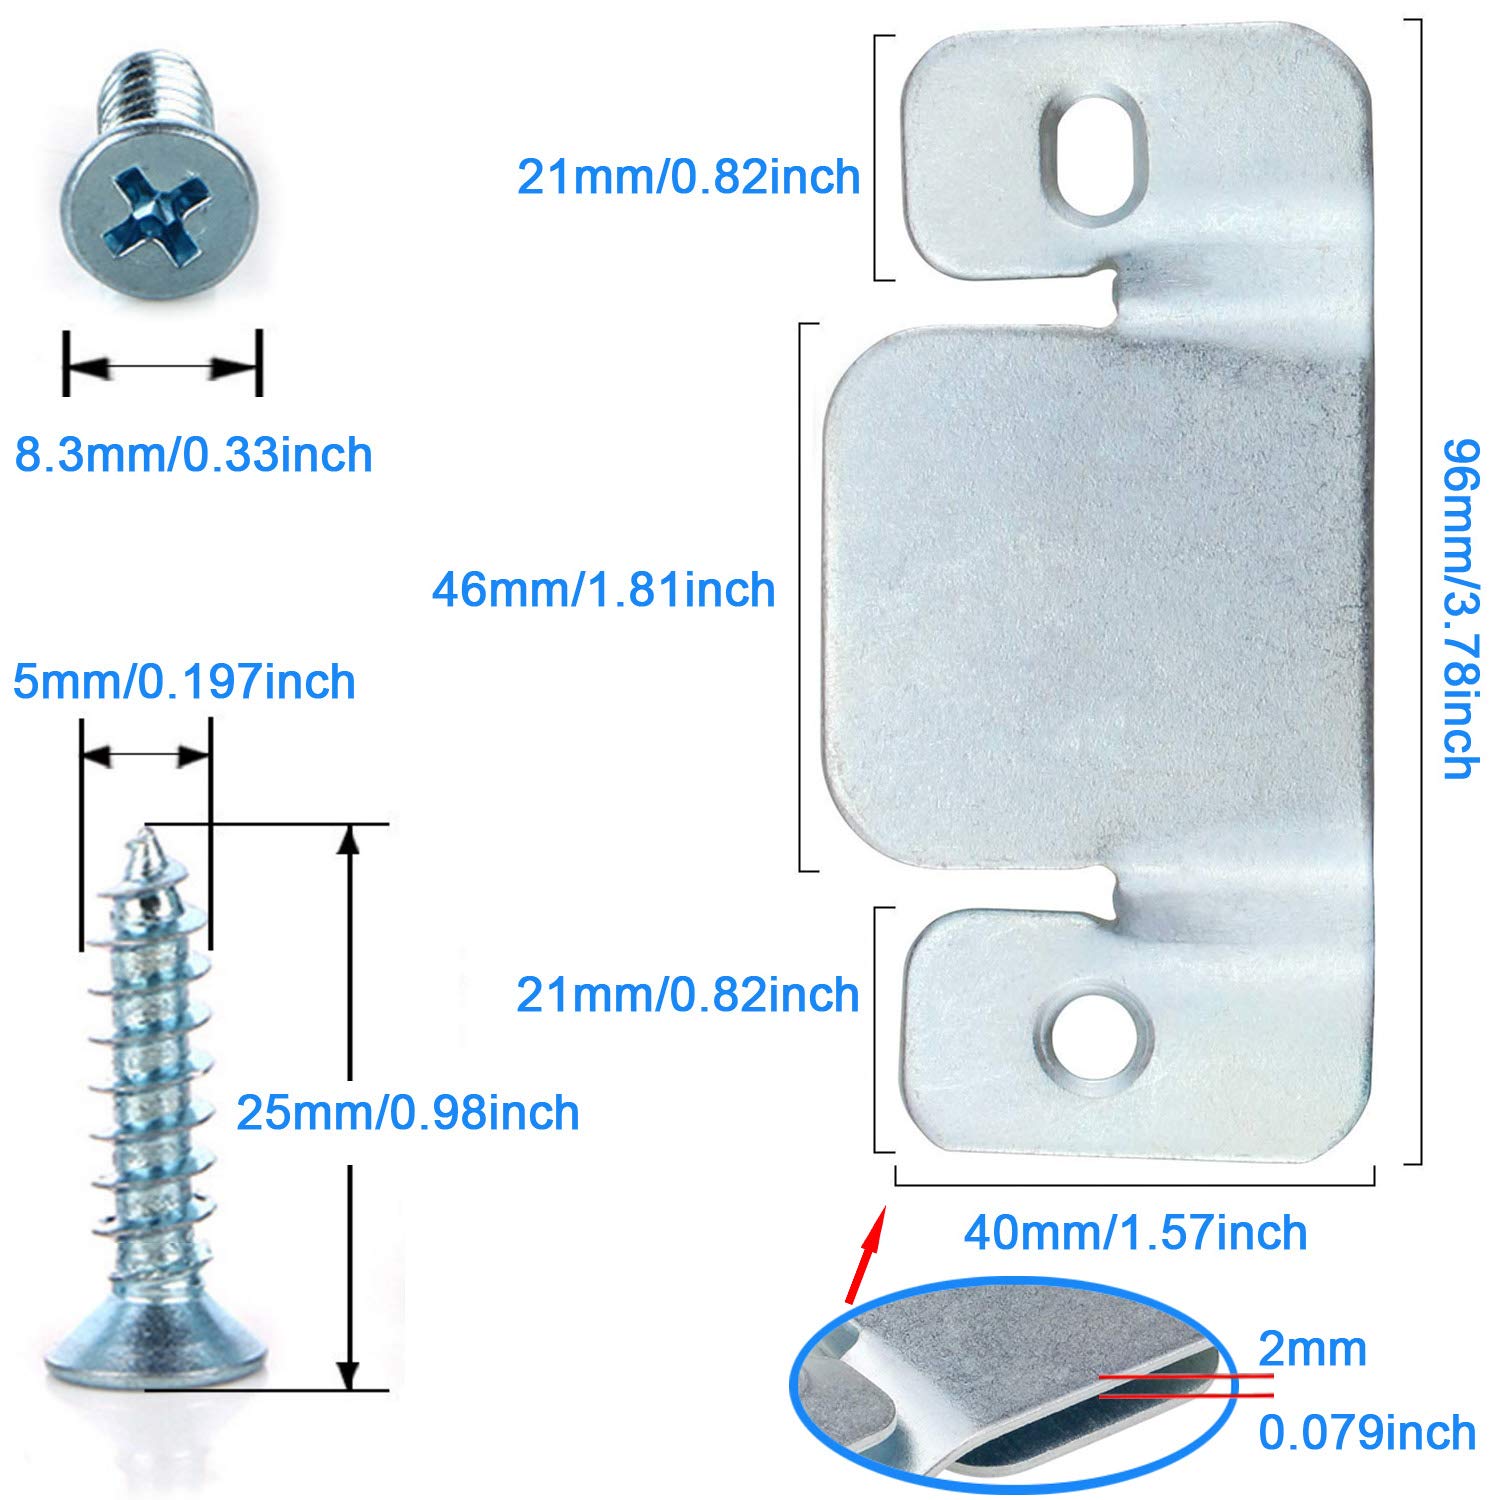 Metal Sectional Couch Connectors Furniture Interlocking,Sectional Sofa Fastener Software Bracket with Screws for Loveseat, Recliner, Chair or Chaise Lounge (4 Pcs)